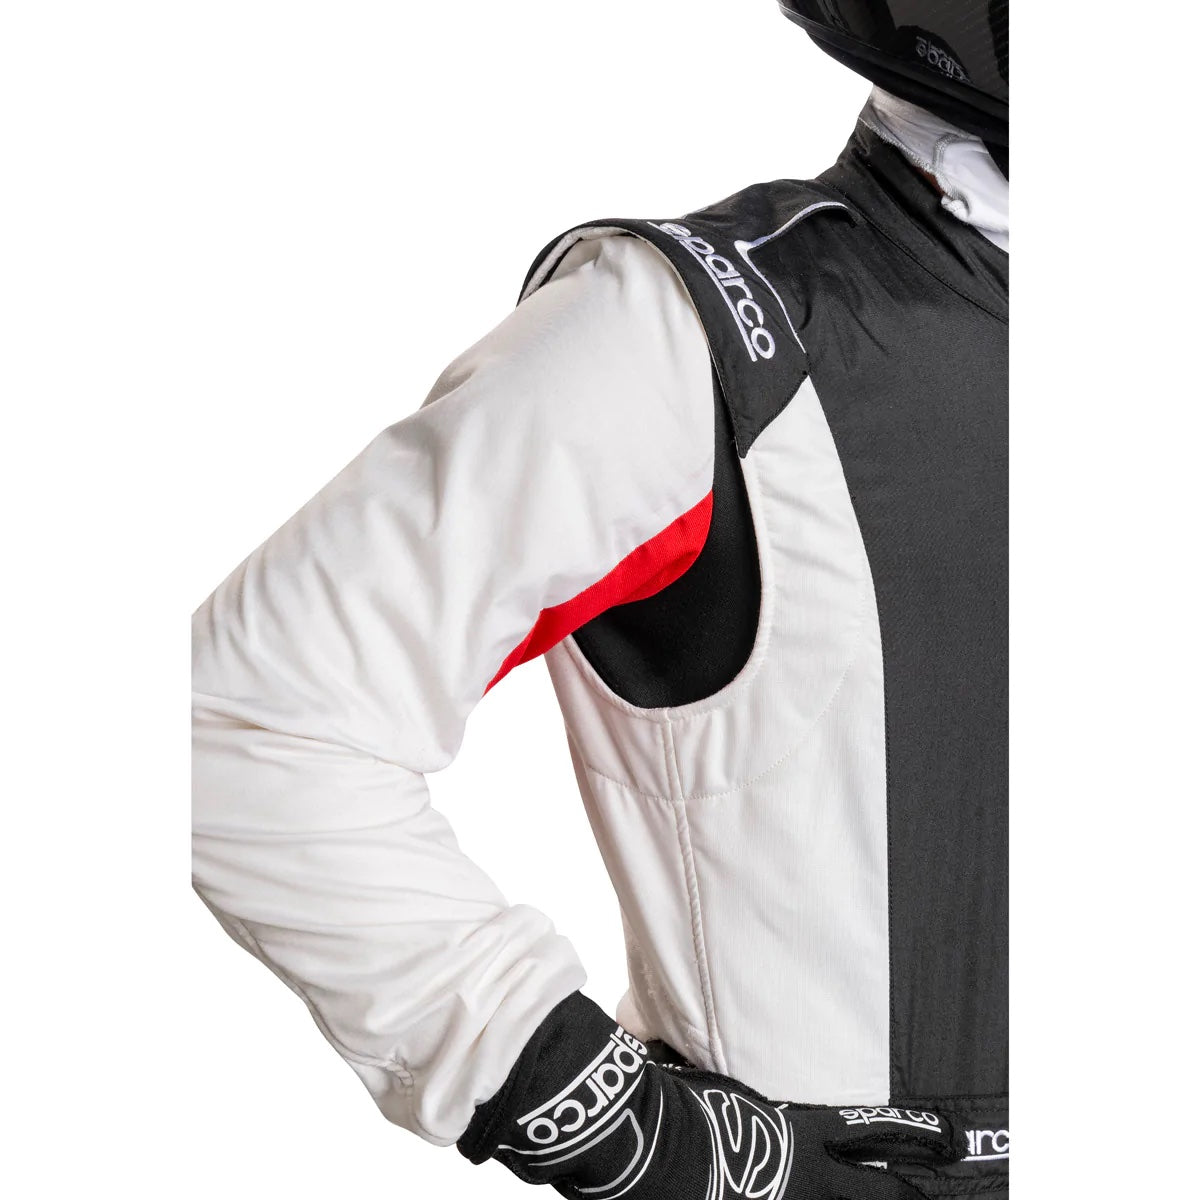 SPARCO COMPETITION USA RACE SUIT BLUE / WHITE FRONT IMAGE LARGEST DISCOUNTS FOR TEH LOWEST PRICE AND BEST DEAL ON A SPARCE RACE SUIT WITH A REVIEW